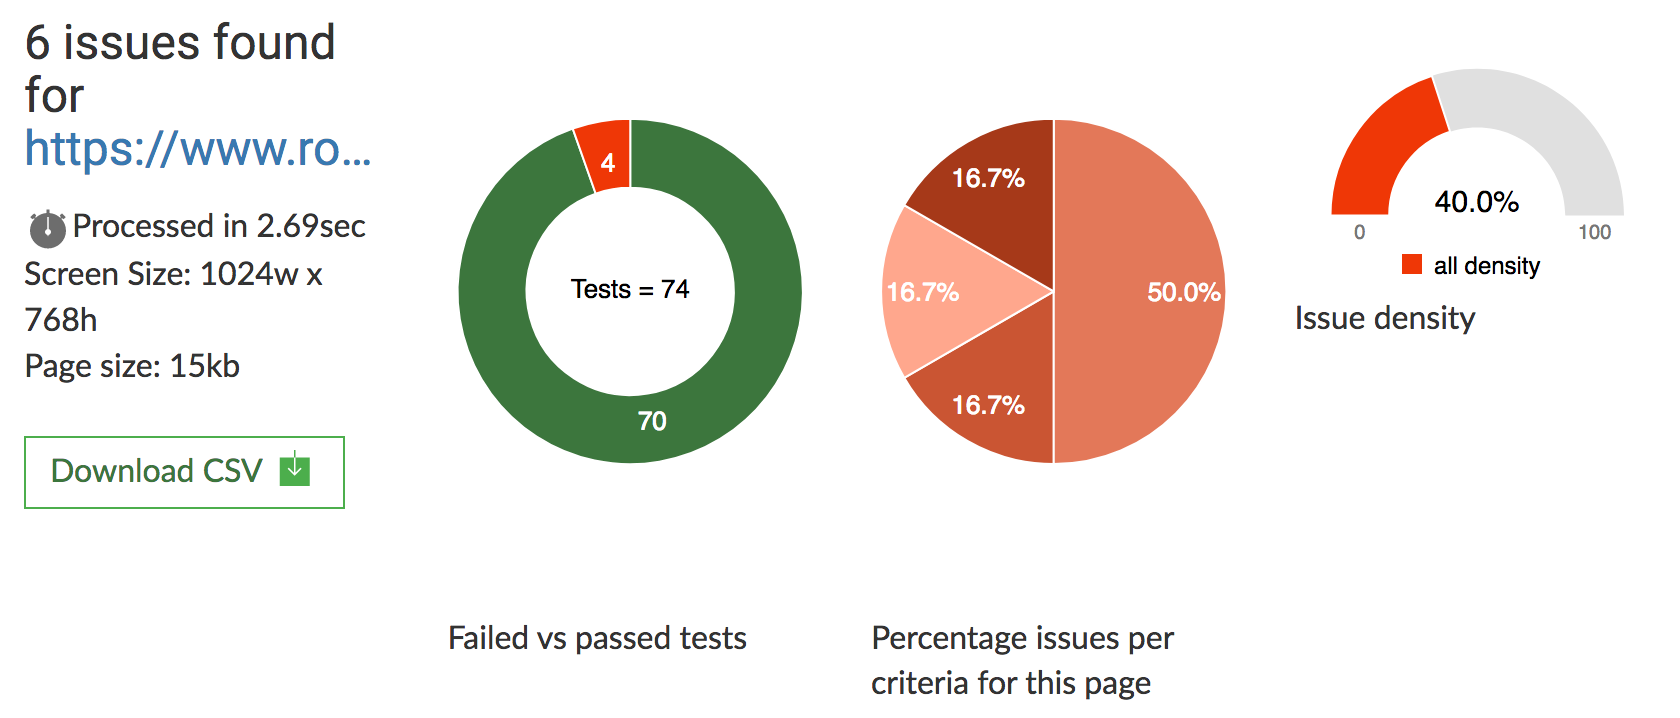 Results of the Tenon test with charts showing the number of tests and issues for a website.